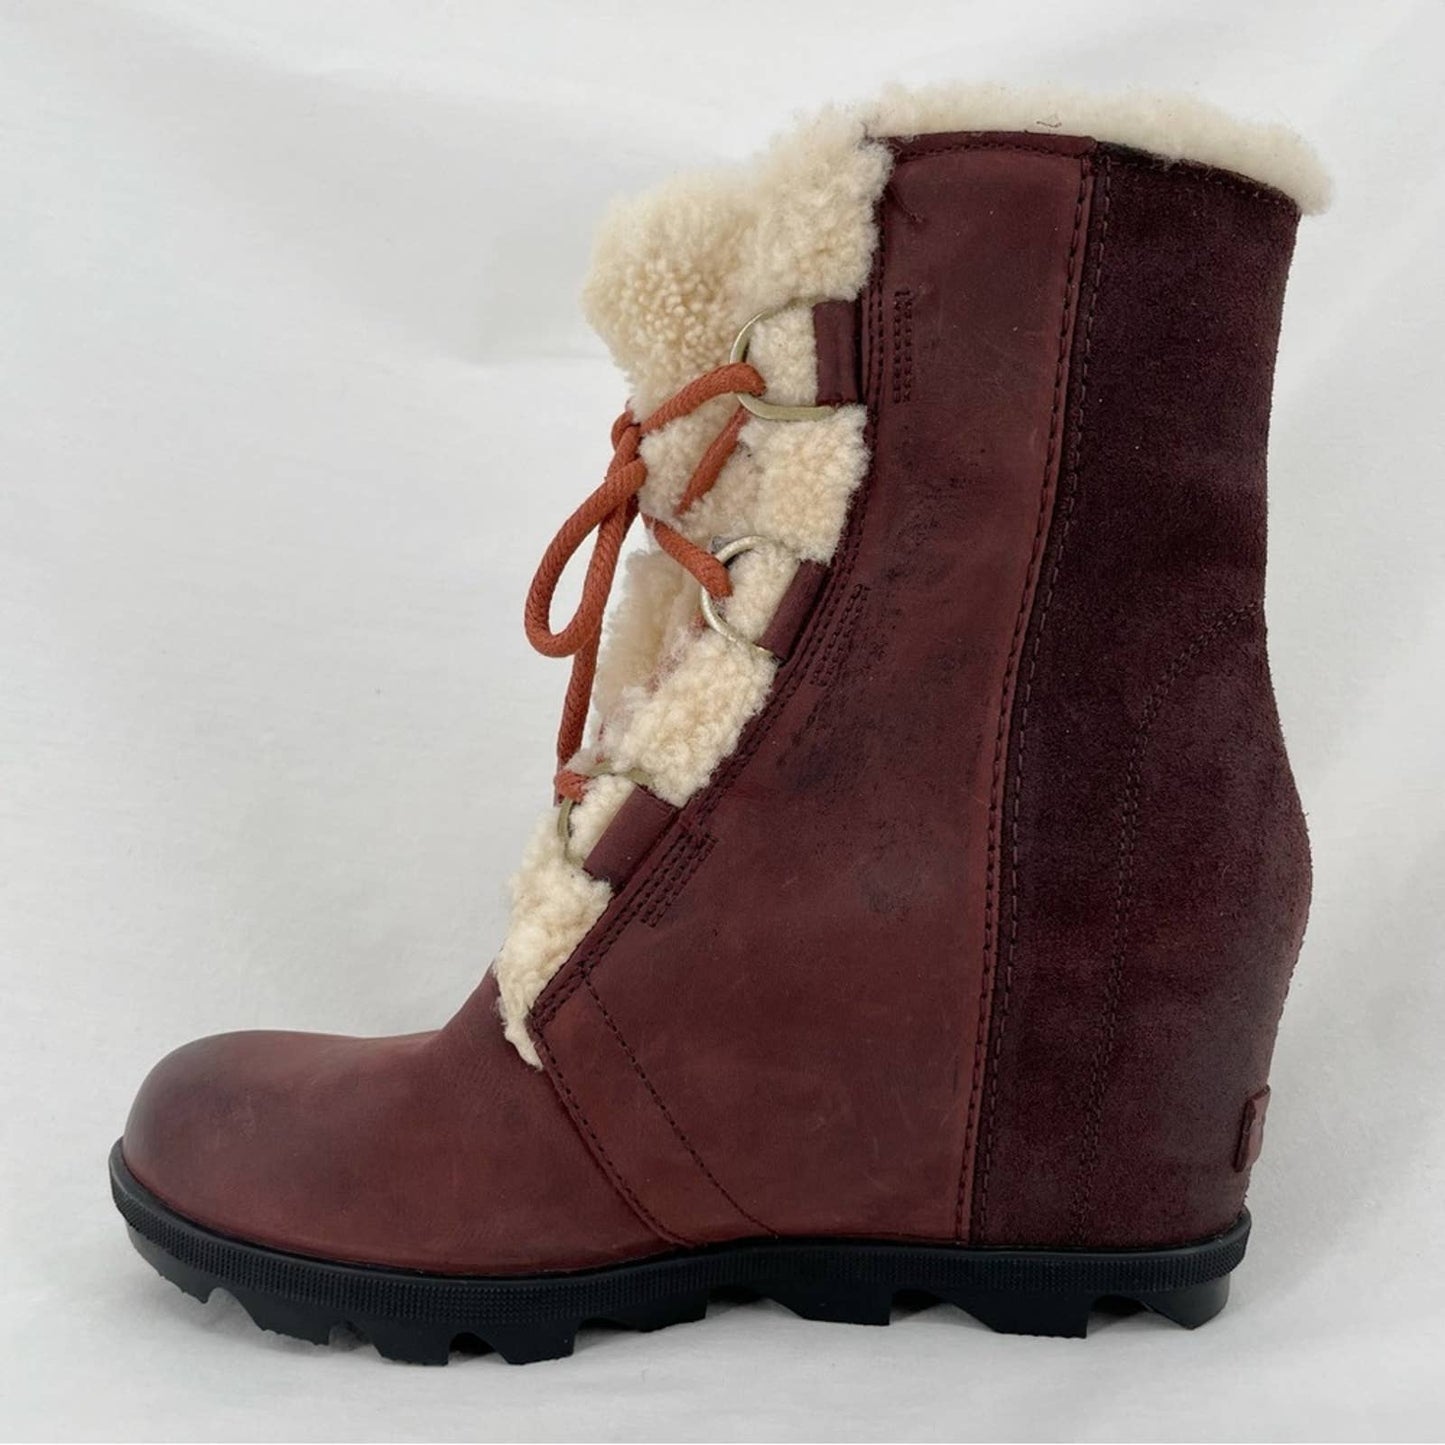 Sorel Joan of Arctic II Cattail Leather Suede Shearling Trim Wedge Mid Boots Size 9